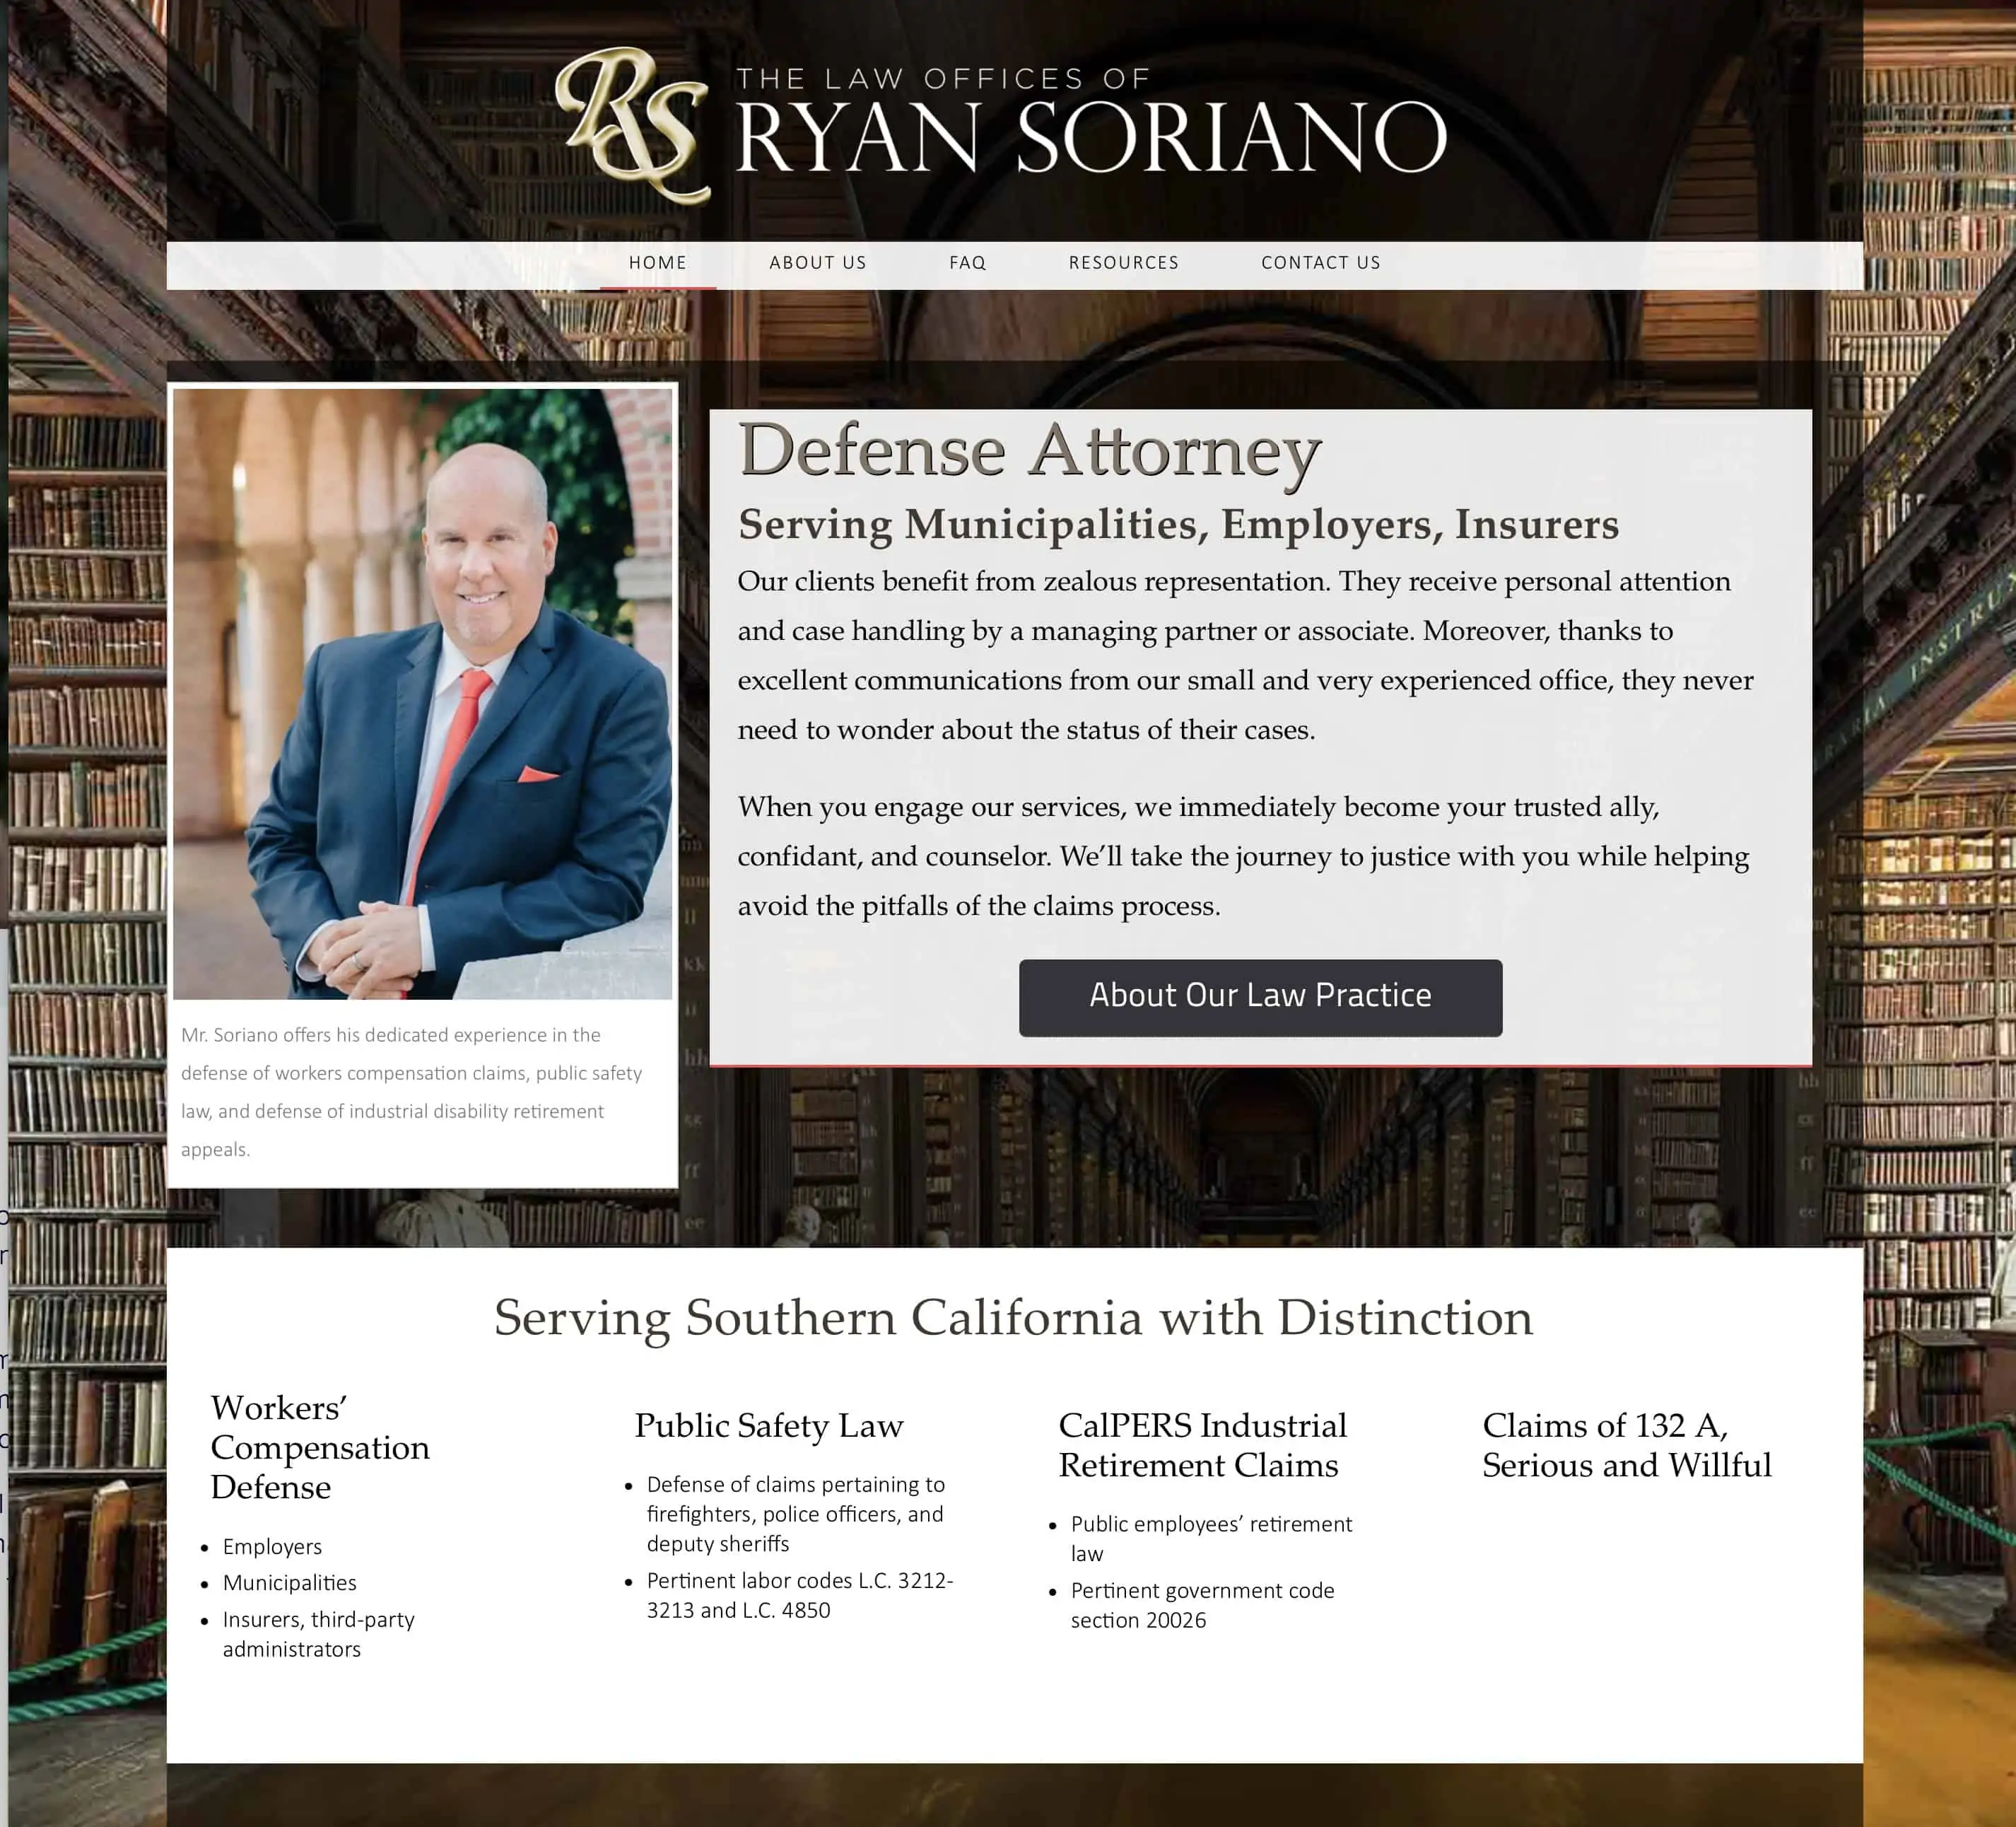 Design and development of websites for lawyers, law firms, and paralegal services